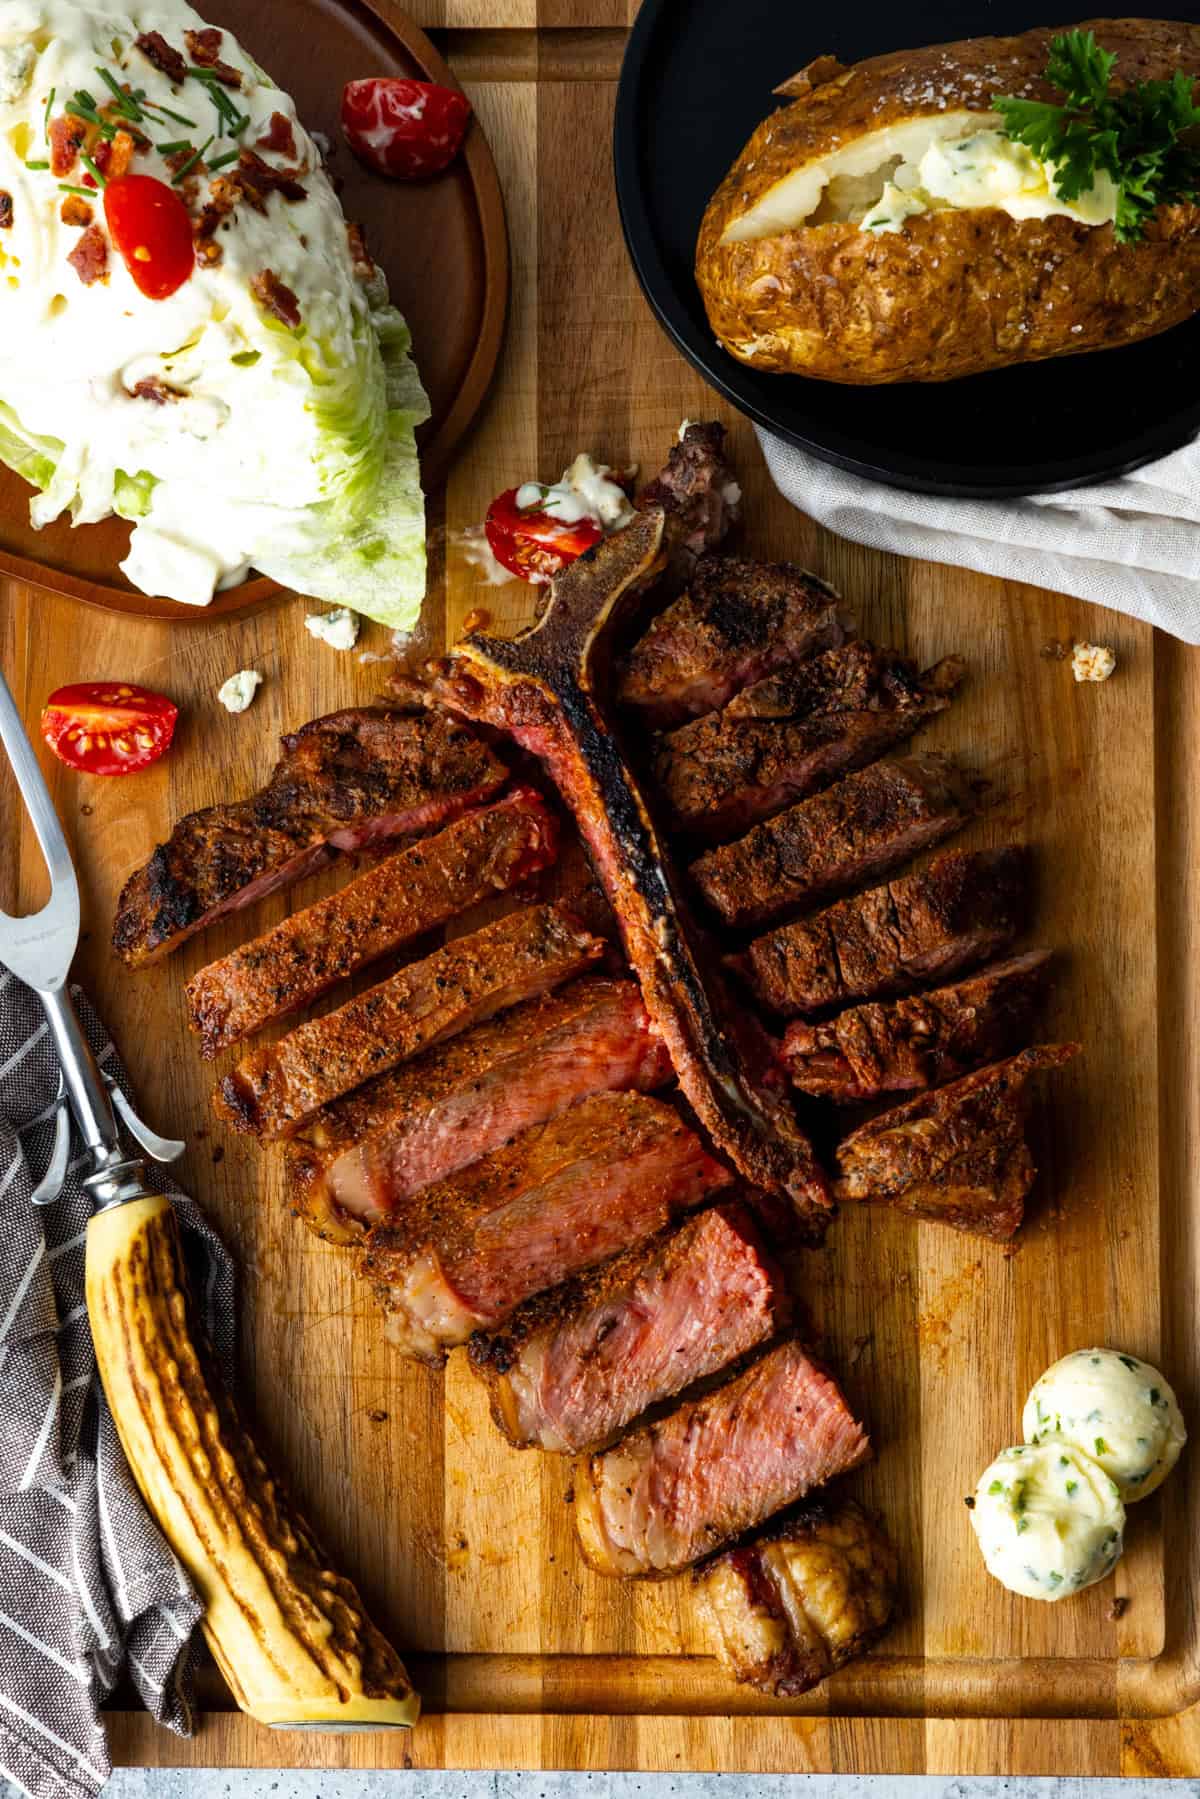 Steak sliced in pieces with baked potato and wedge salad on wood cutting board.